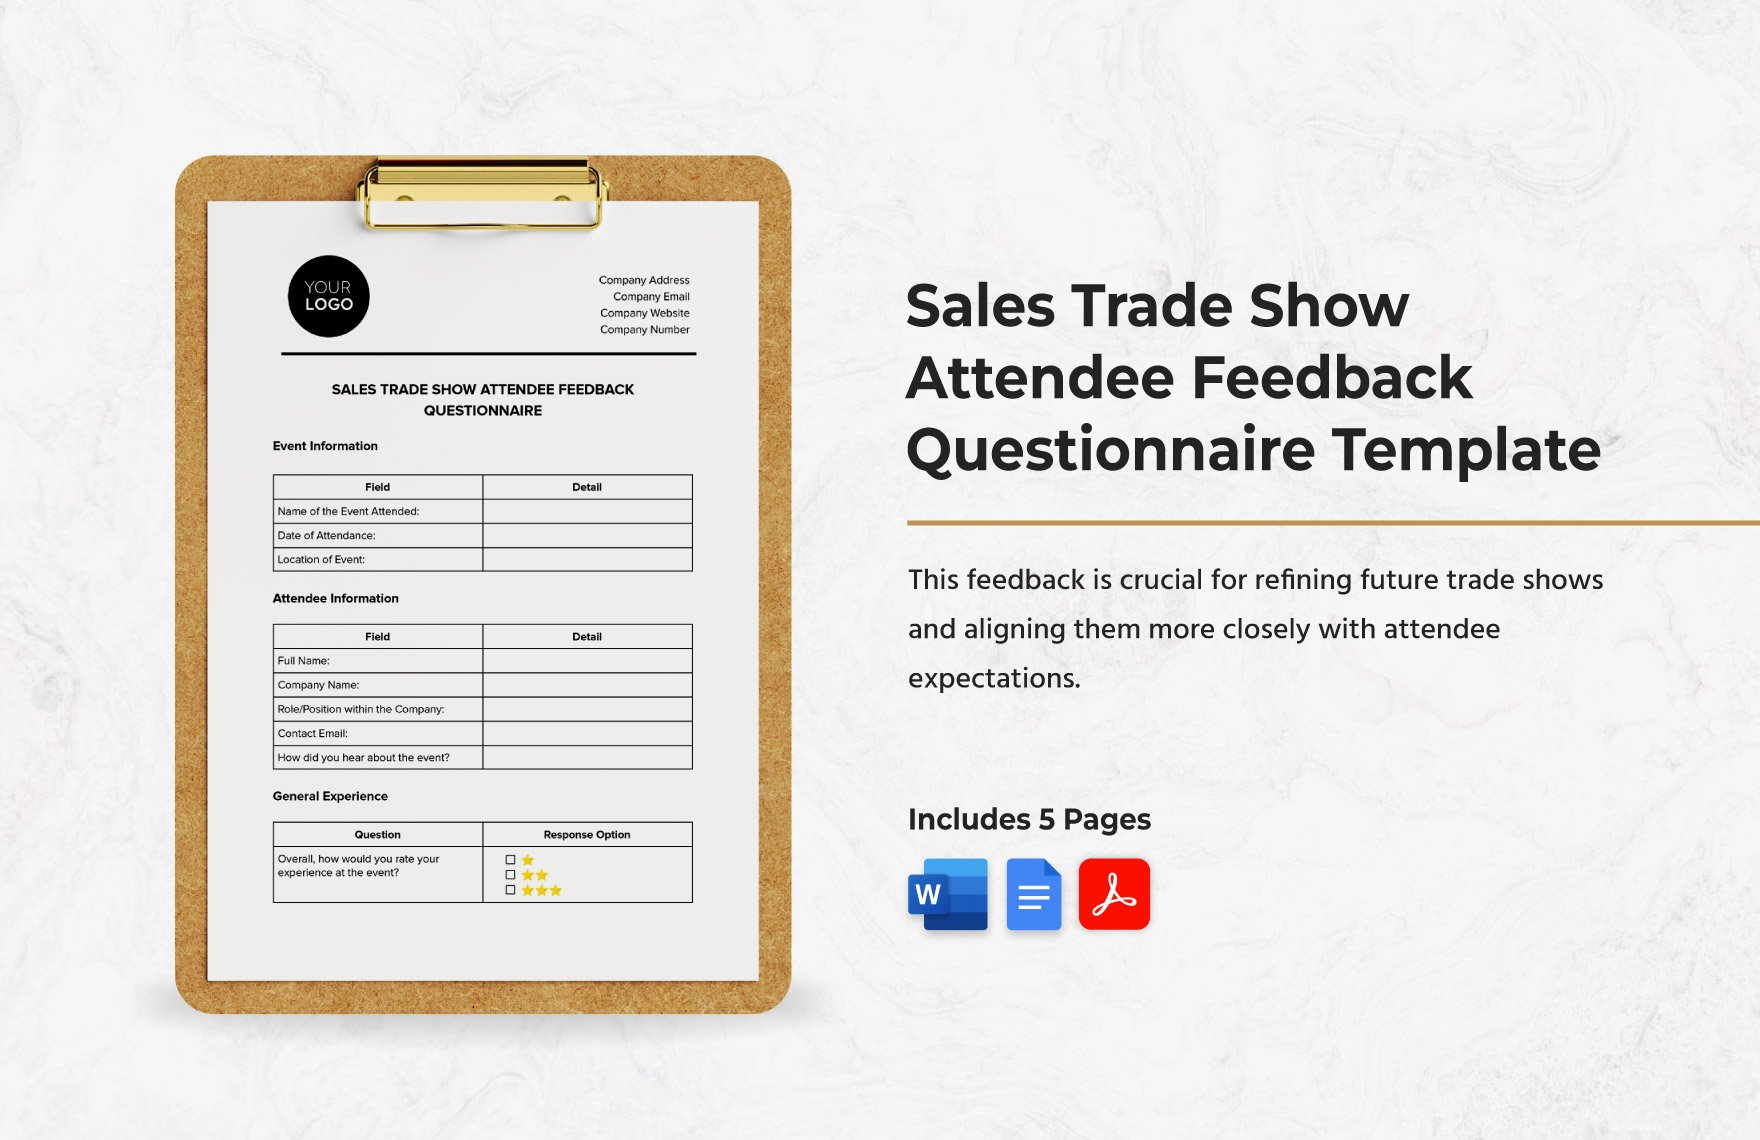 Sales Trade Show Attendee Feedback Questionnaire Template